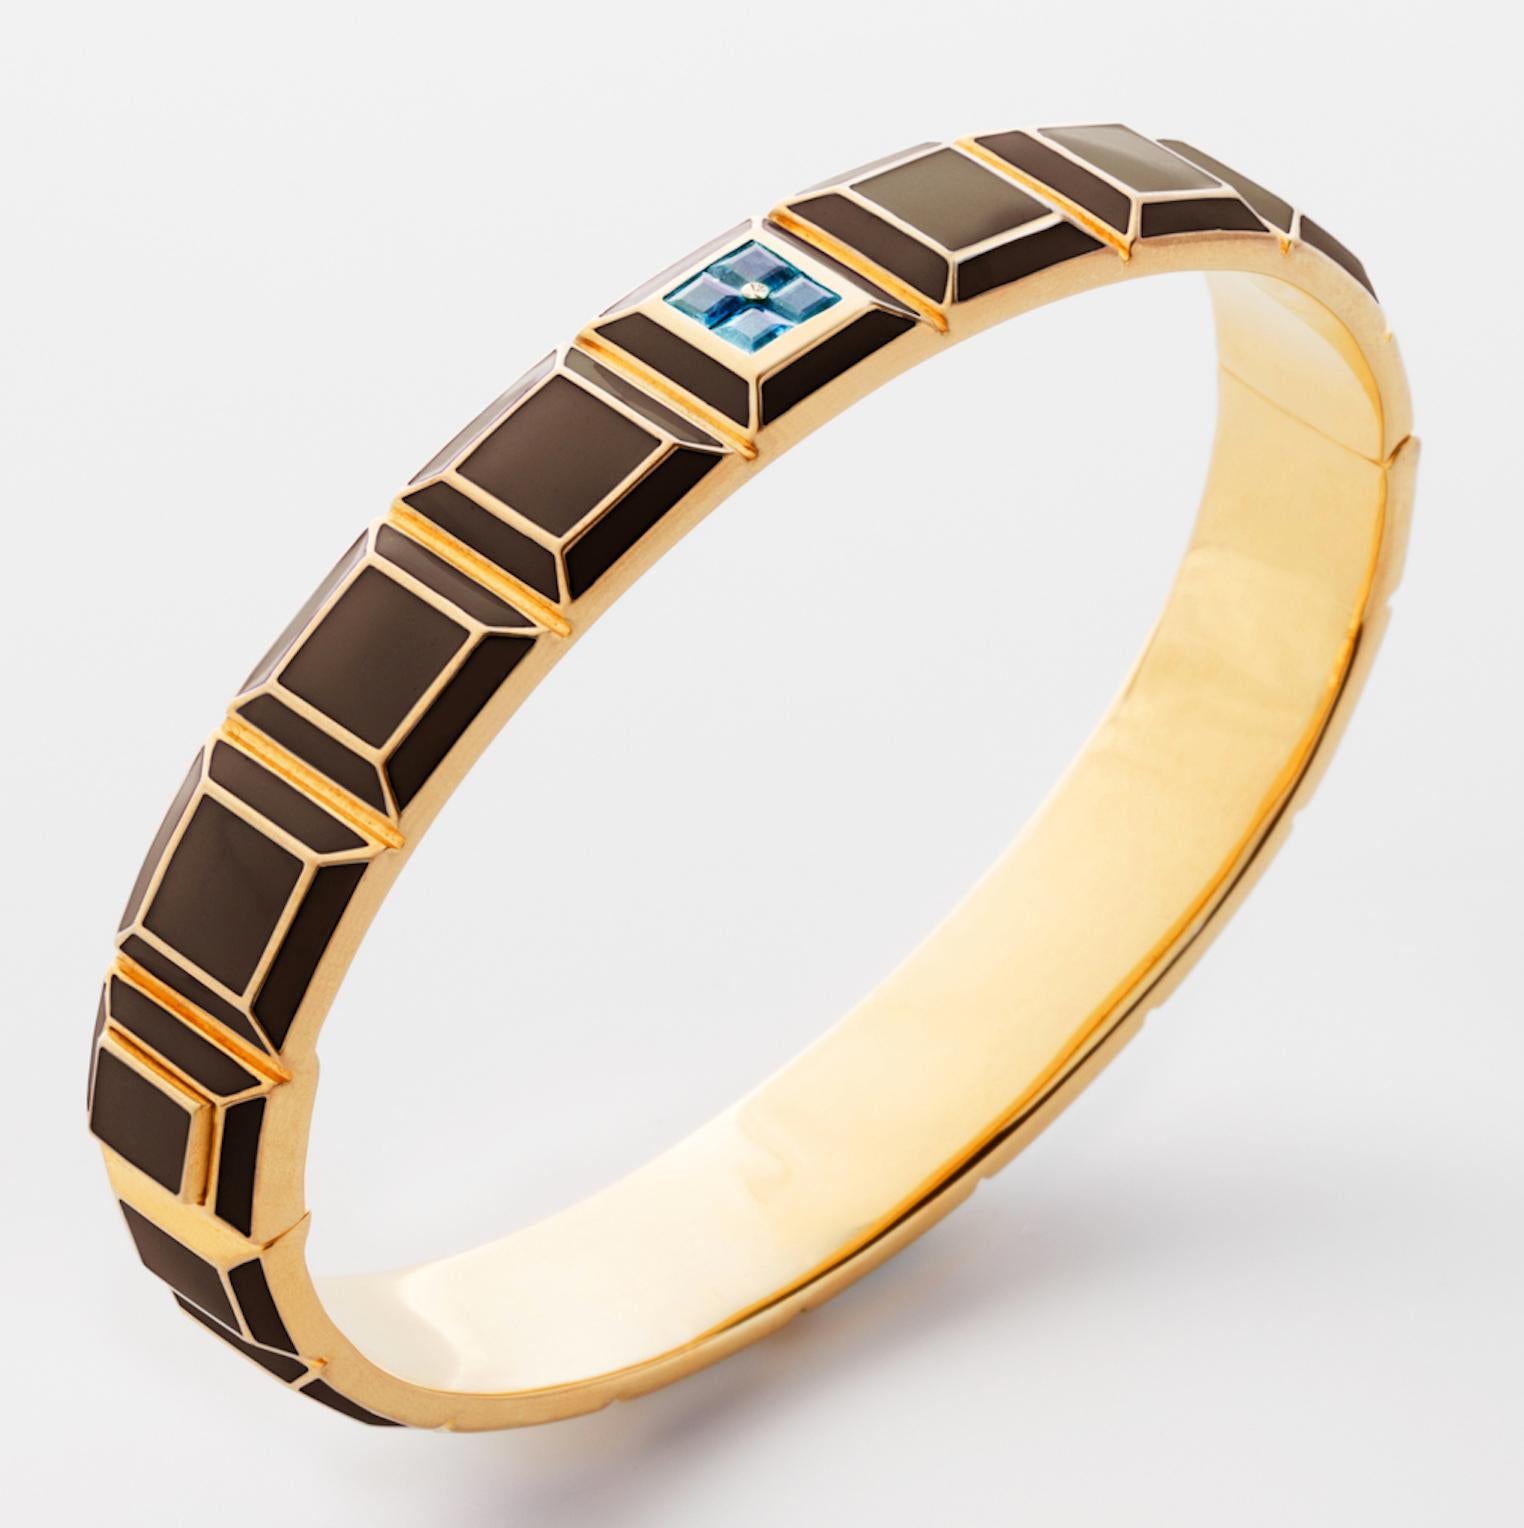 Gold-Plated Enamel Carousel Bracelet features a Yellow Gold-Plated Silver bracelet with Brown Enamel and Aquamarine Stones, along with a clasp closure that secures the bracelet onto the wearer's wrist. 
Yellow Gold-Plated Silver, Brown Enamel,